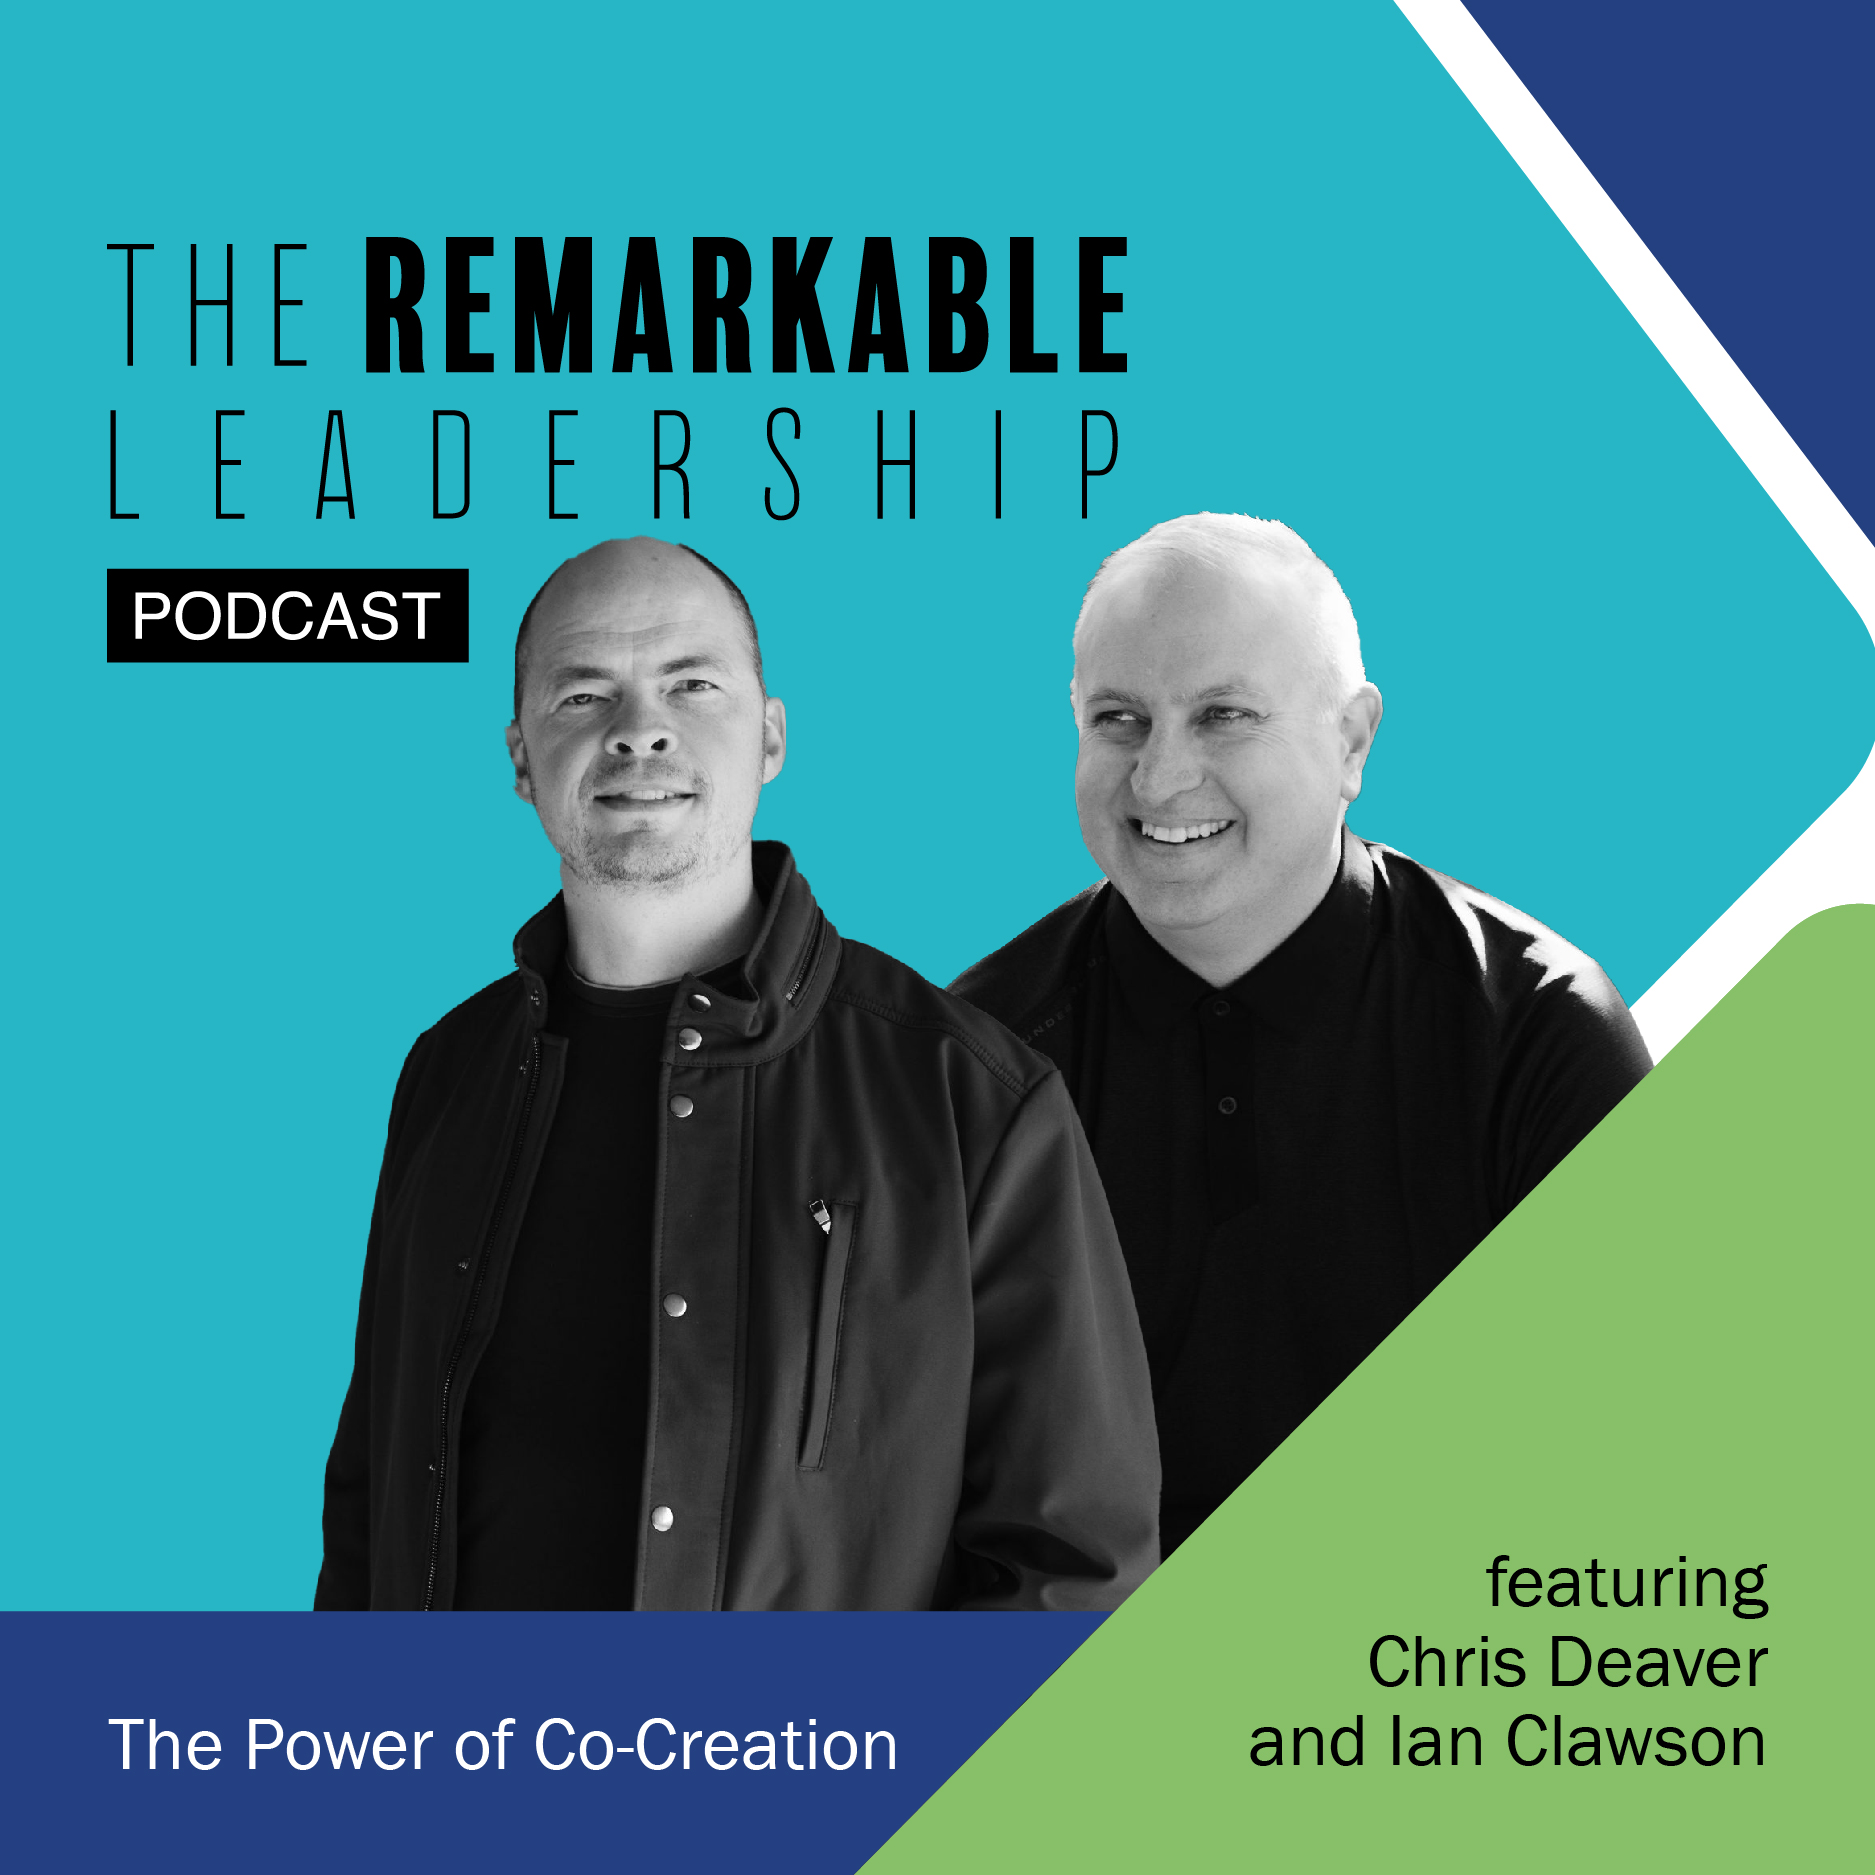 The Power of Co-Creation with Chris Deaver and Ian Clawson